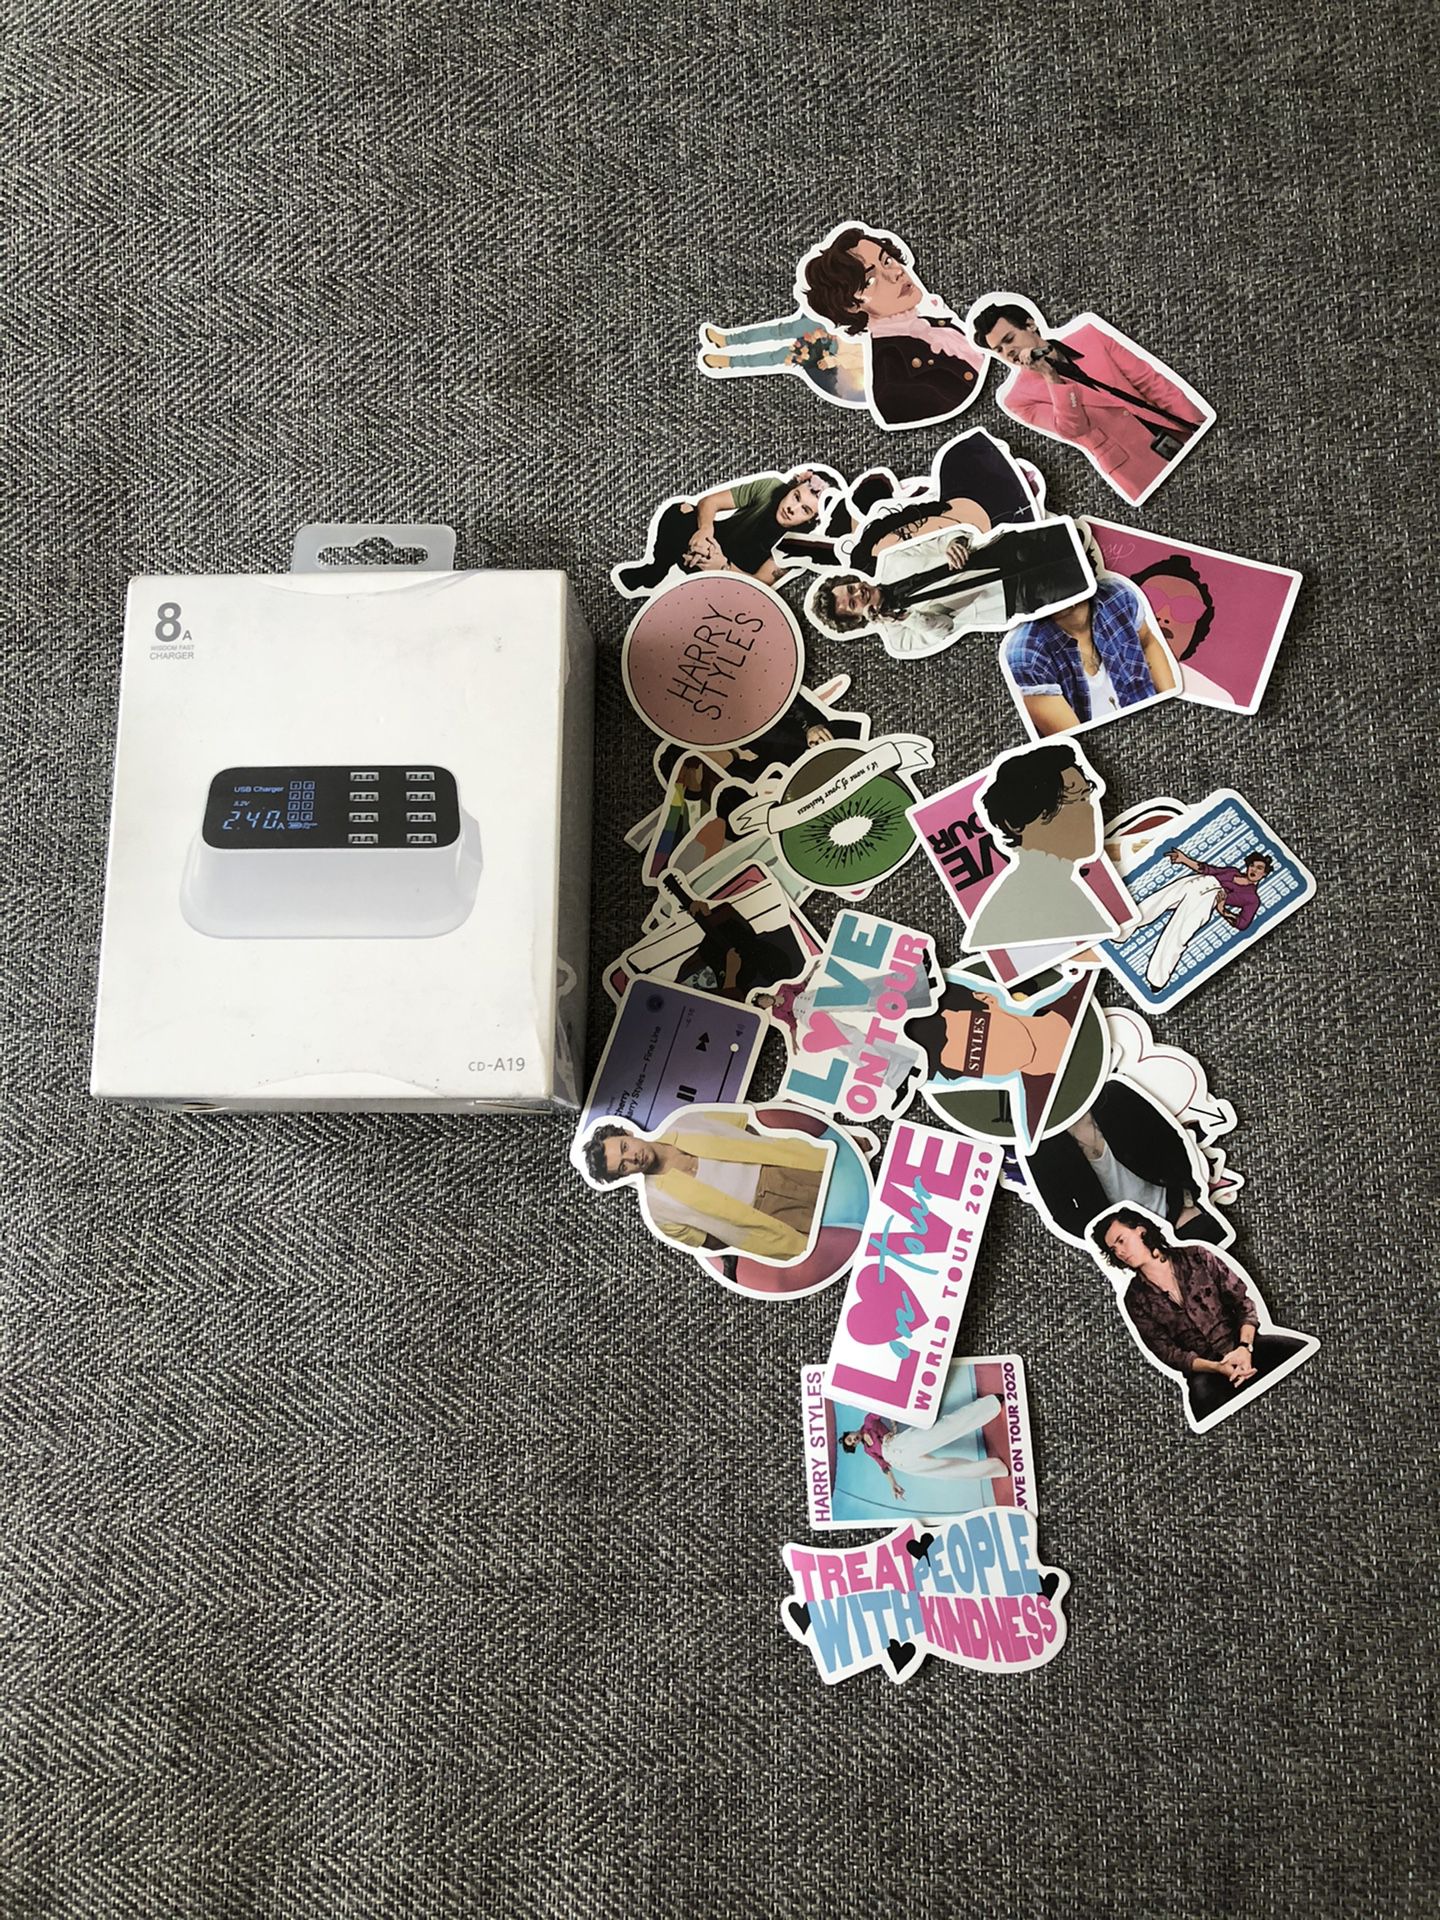 Charger & stickers bundle